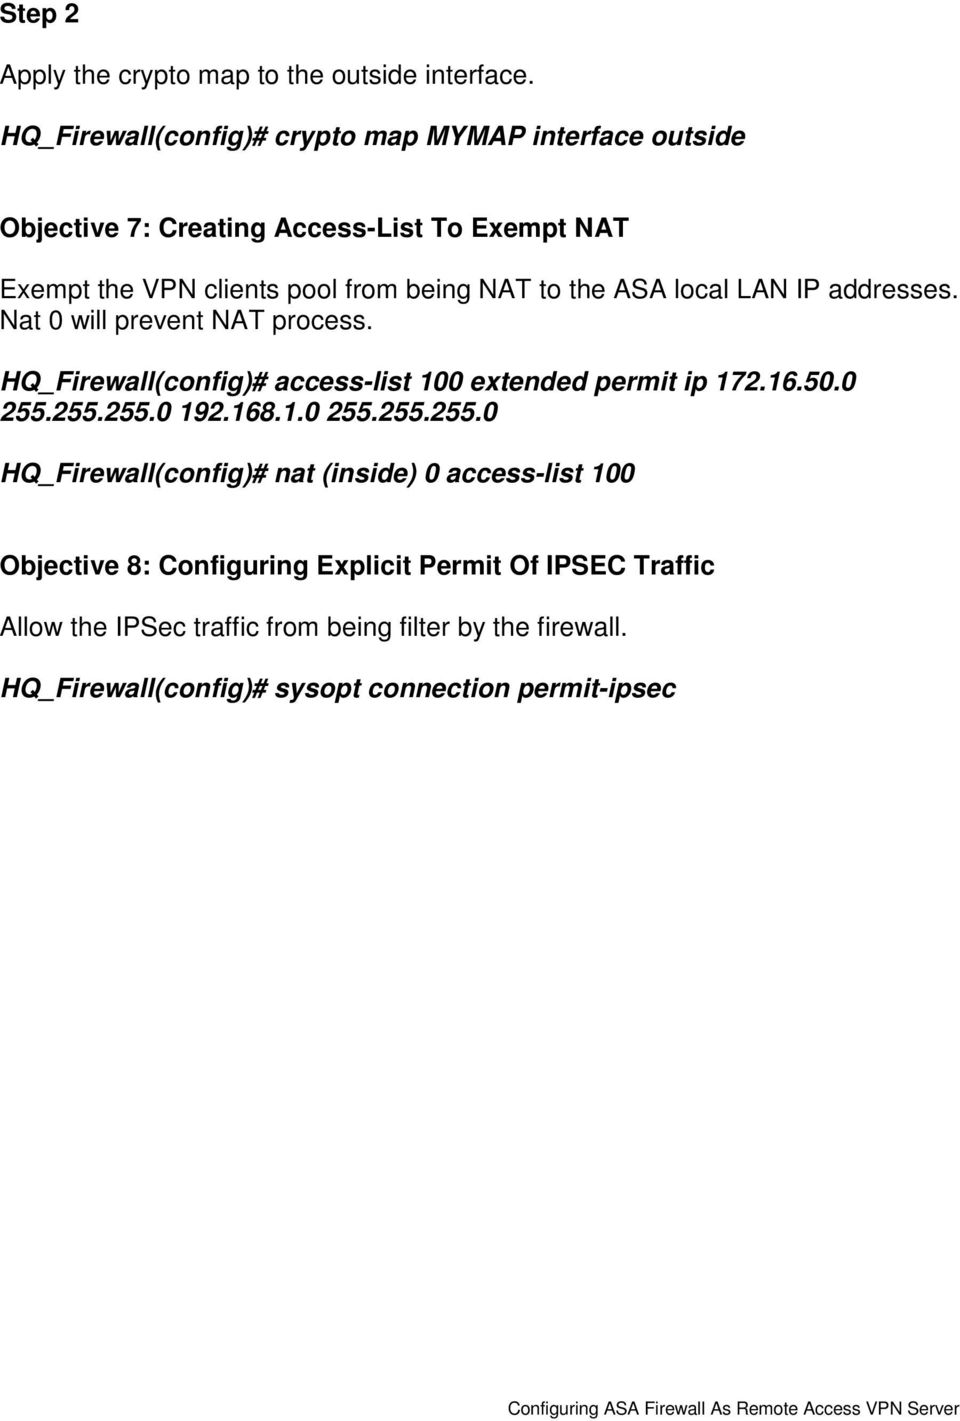 to the ASA local LAN IP addresses. Nat 0 will prevent NAT process. HQ_Firewall(config)# access-list 100 extended permit ip 172.16.50.0 255.255.255.0 192.